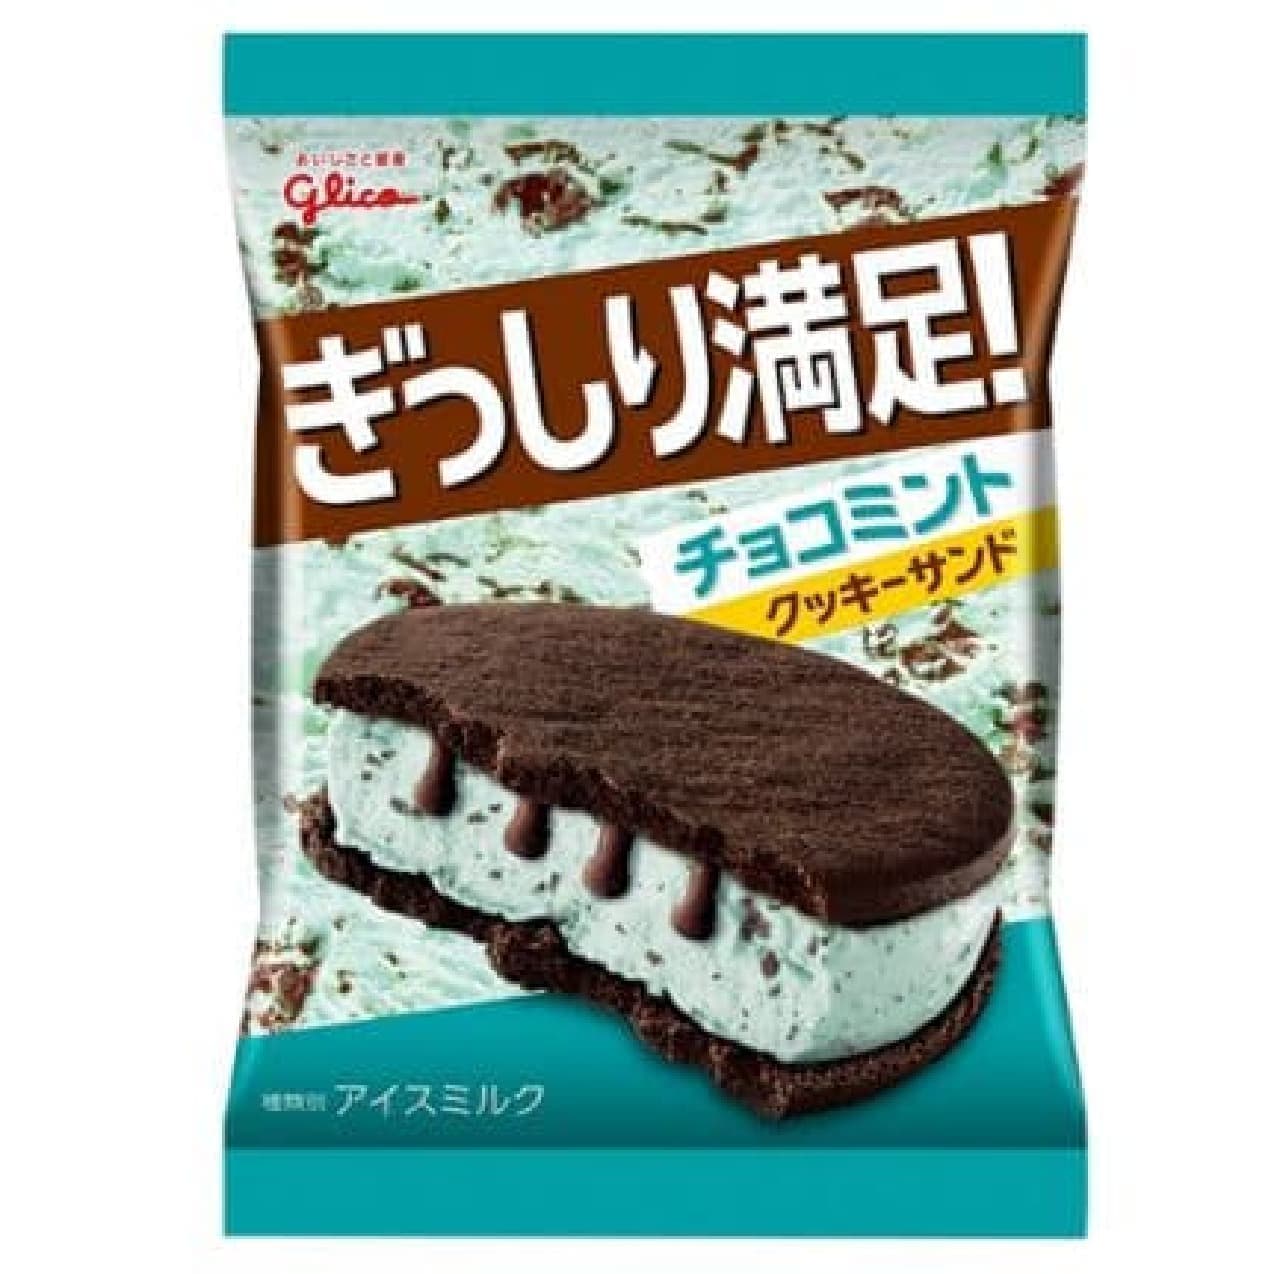 Glico is fully satisfied! Chocolate mint cookie sandwich